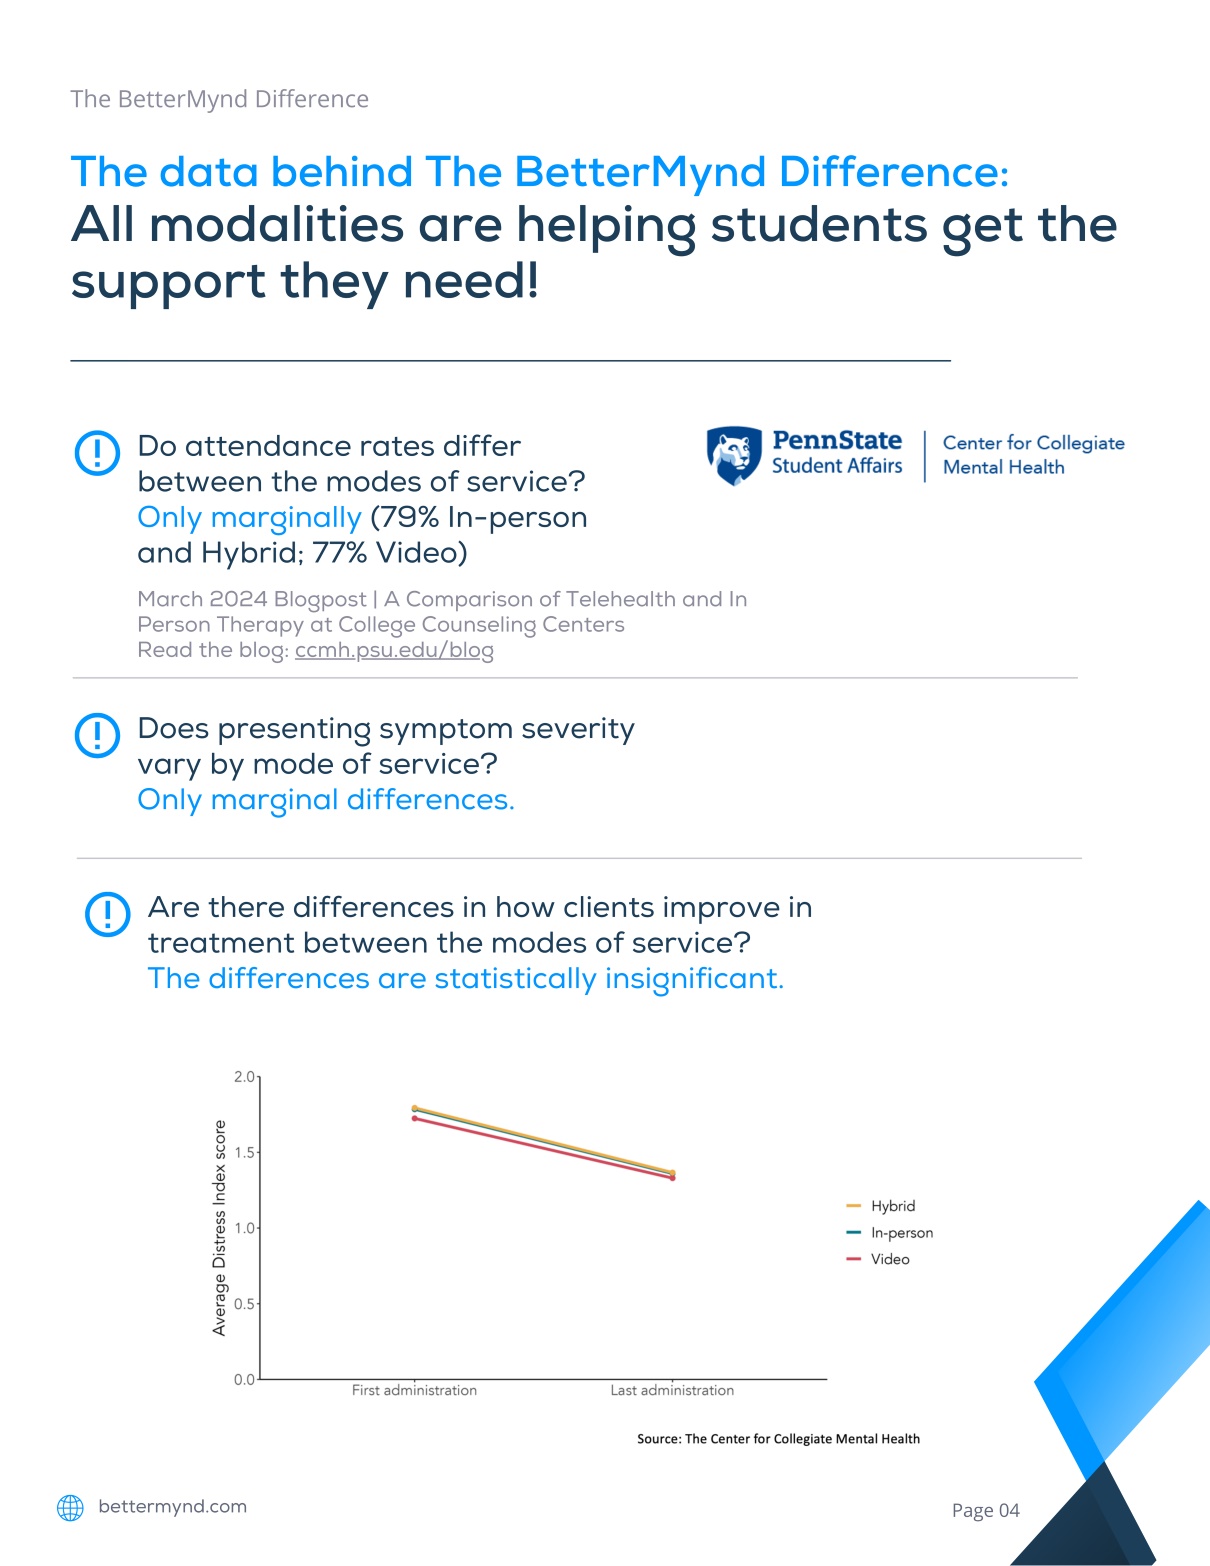 All modalities are helping students get the support they need